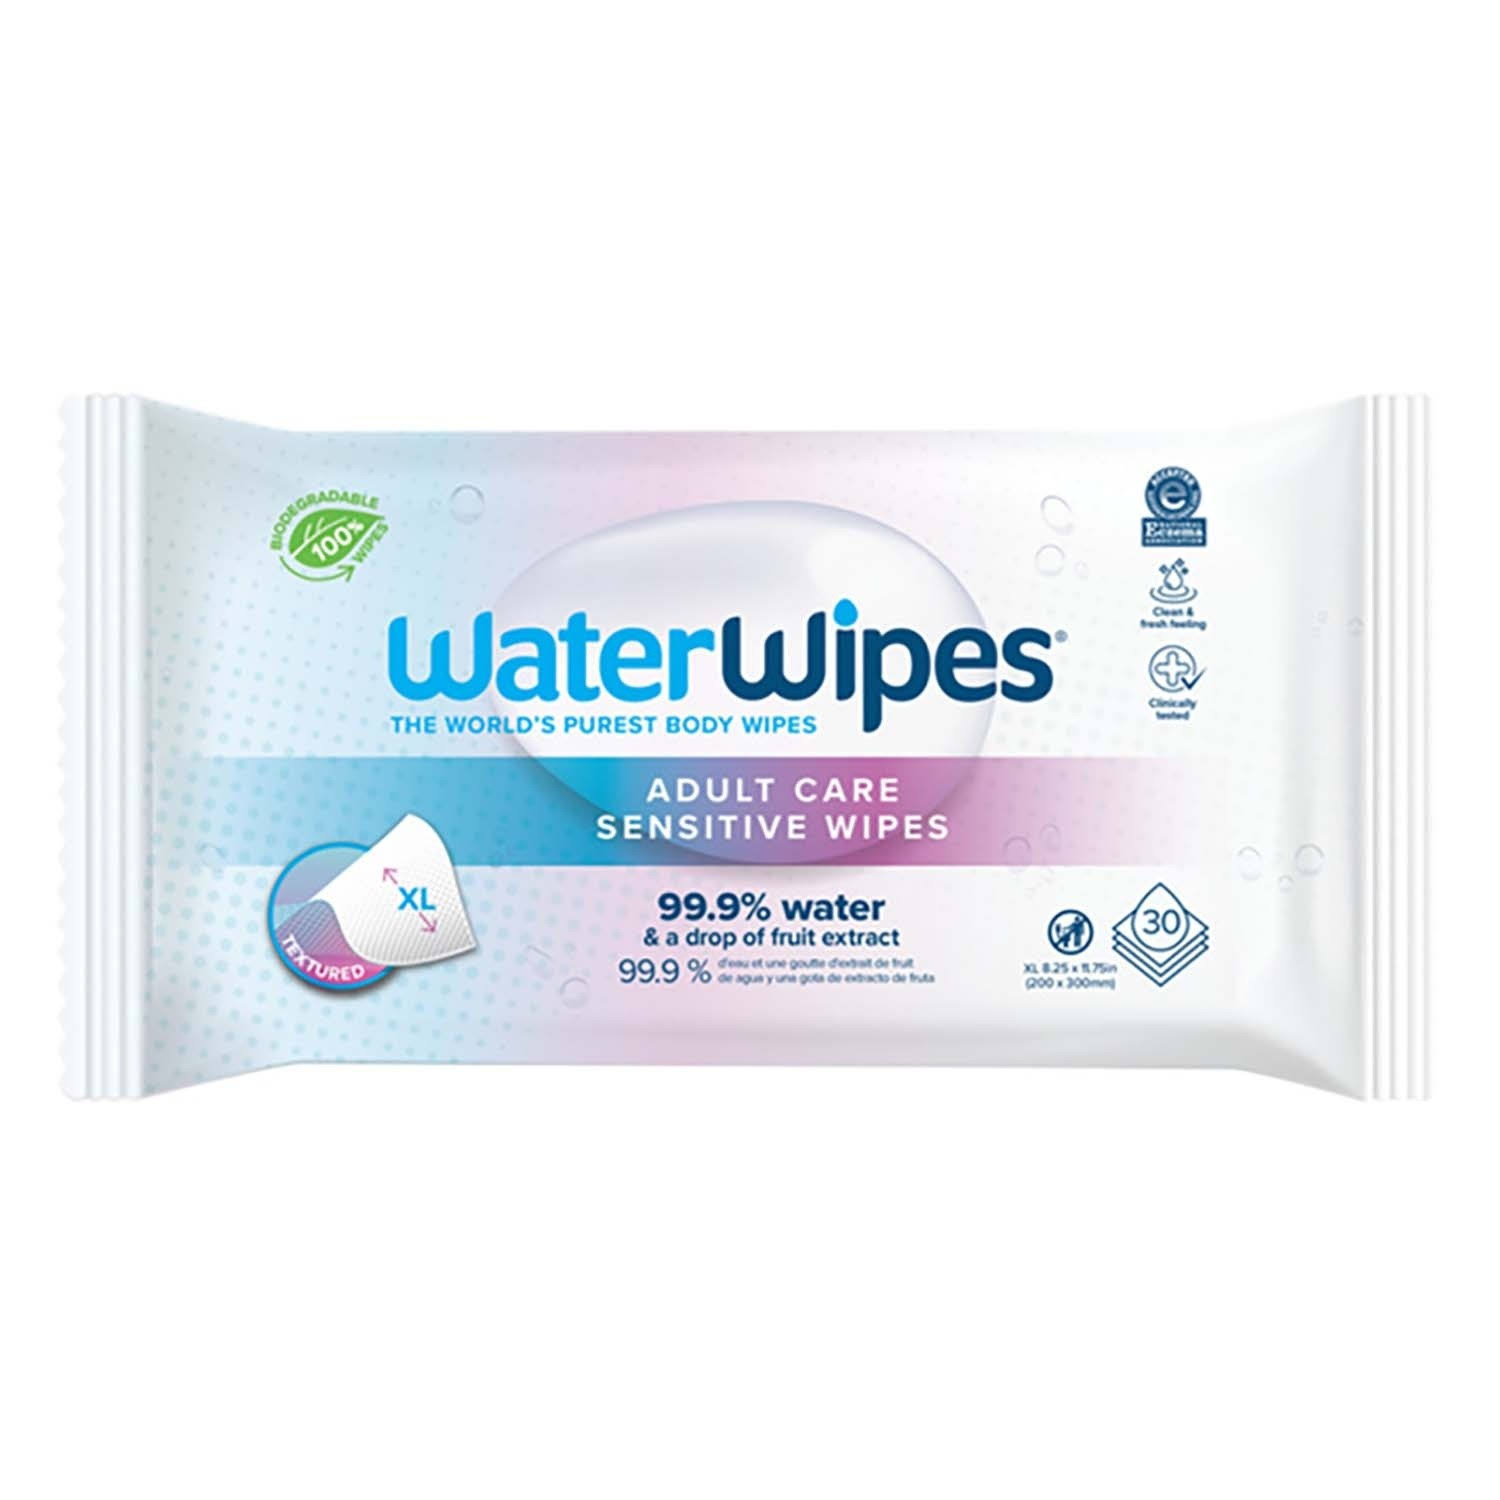 Water Wipes Adult Care Sensitive Wipes